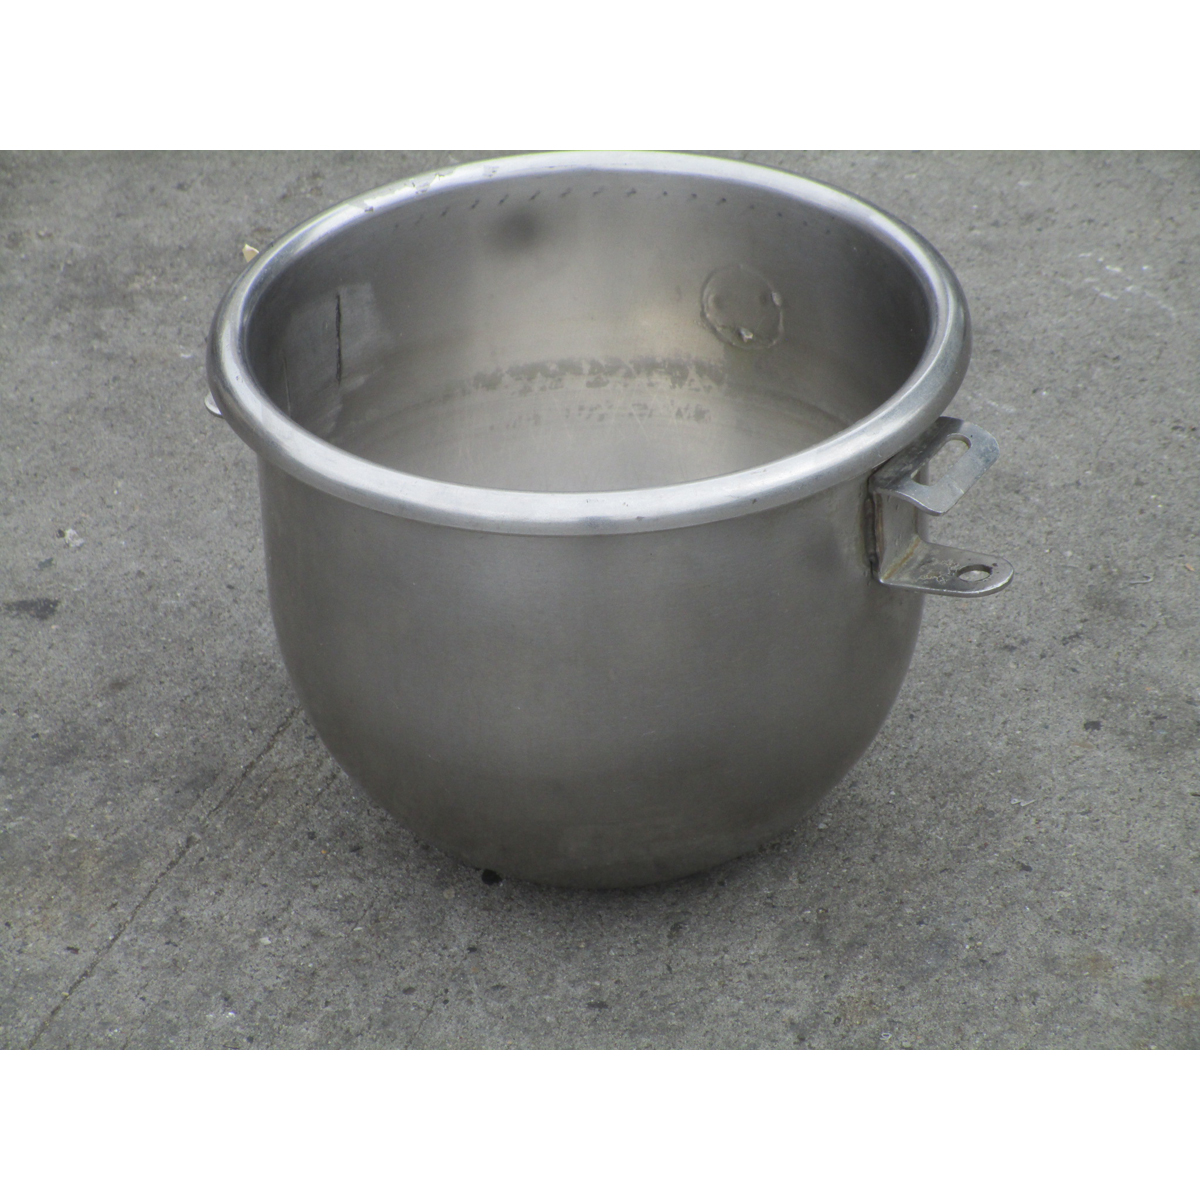 Hobart 00-295644 12 Quart Bowl To Fit A200 Mixer, Used Good Condition image 1